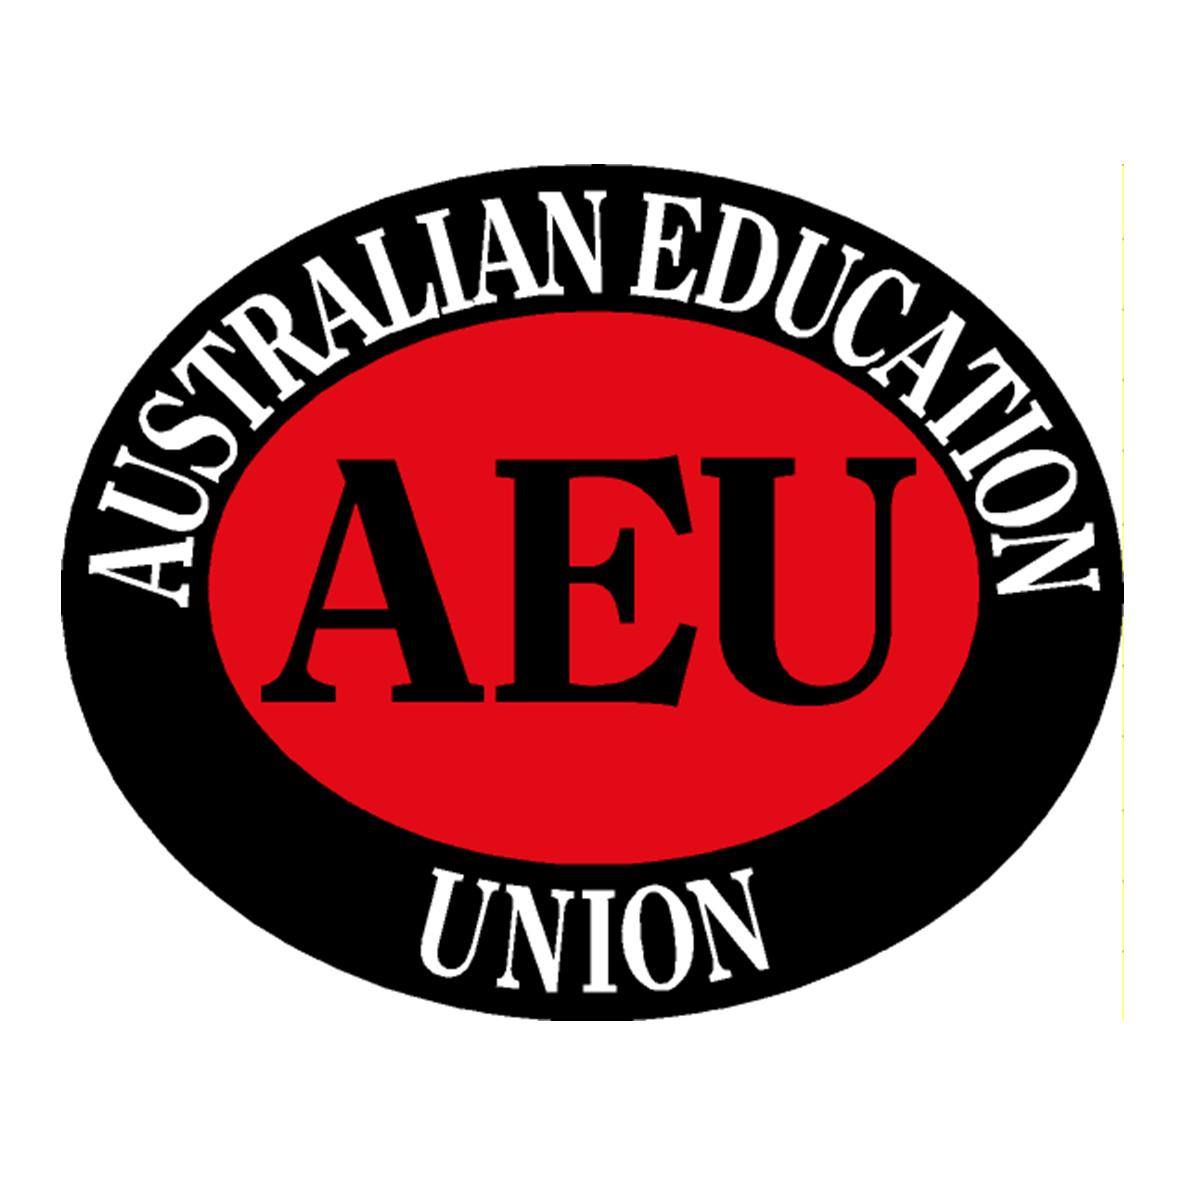 'Ms Haythorpe asked why the Morrison Govt had nearly $4 billion sitting in an unused education investment fund while TAFEs, such as the campus in Launceston, were being closed due to lack of funding to upgrade infrastructure.' @CHaythorpeAEU aeufederal.org.au/news-media/med… #StopTAFECuts